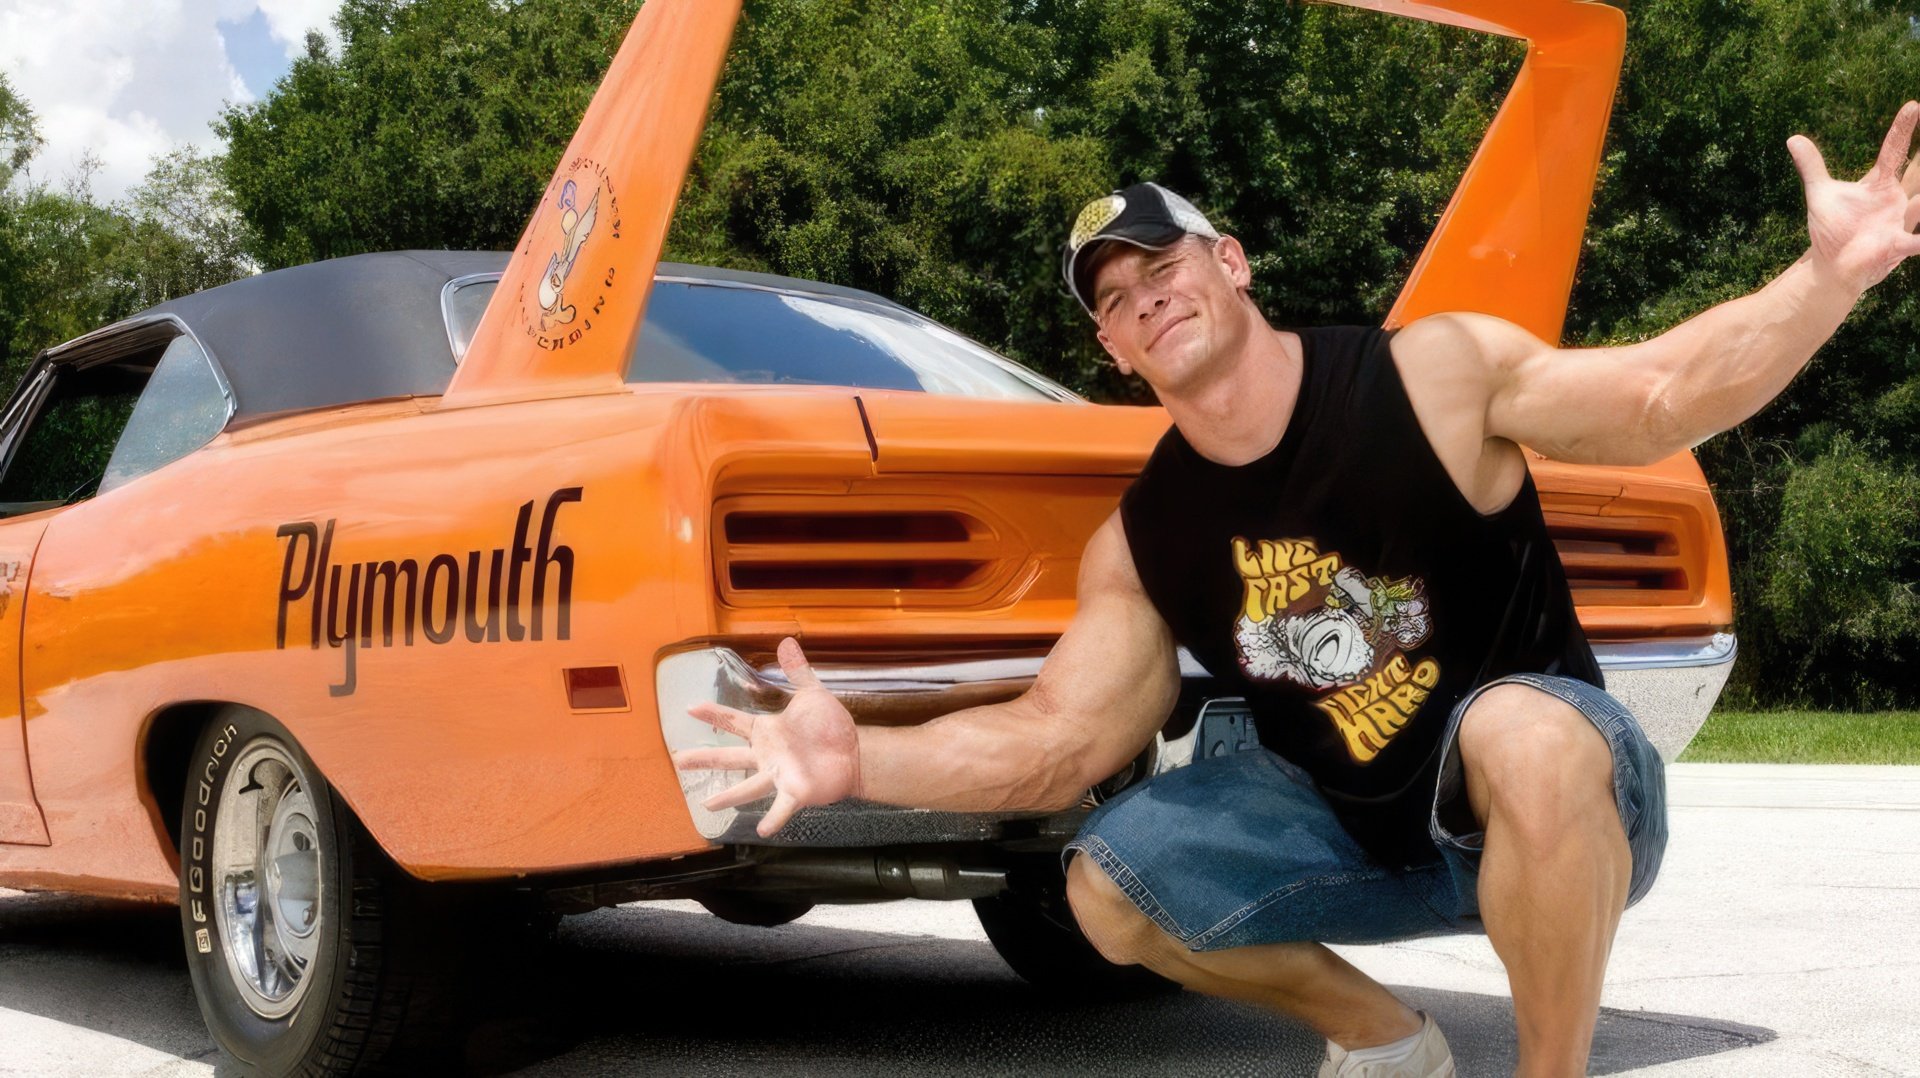 The one of Cena’s favorite’s spotcars